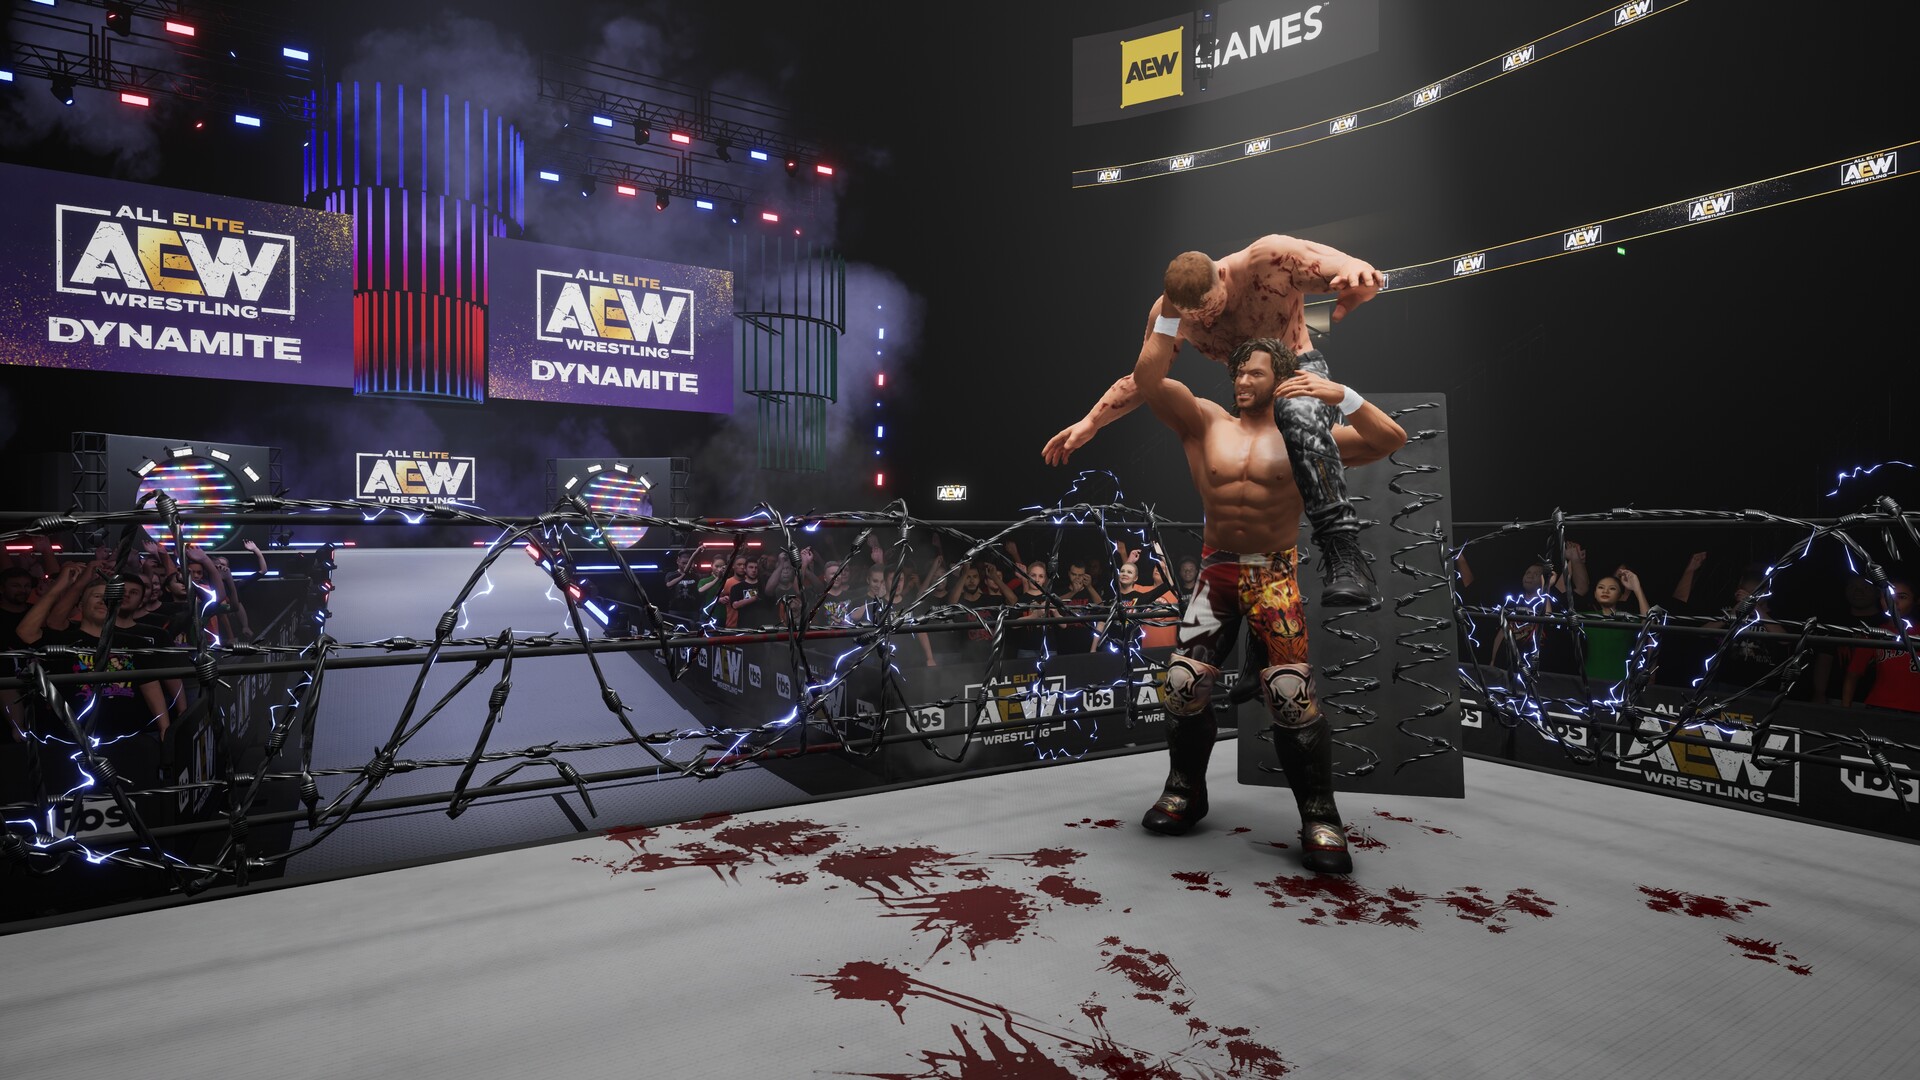 JUEGO SONY PS5 ALL ELITE WRESTLING: FIGHT FOREVER 